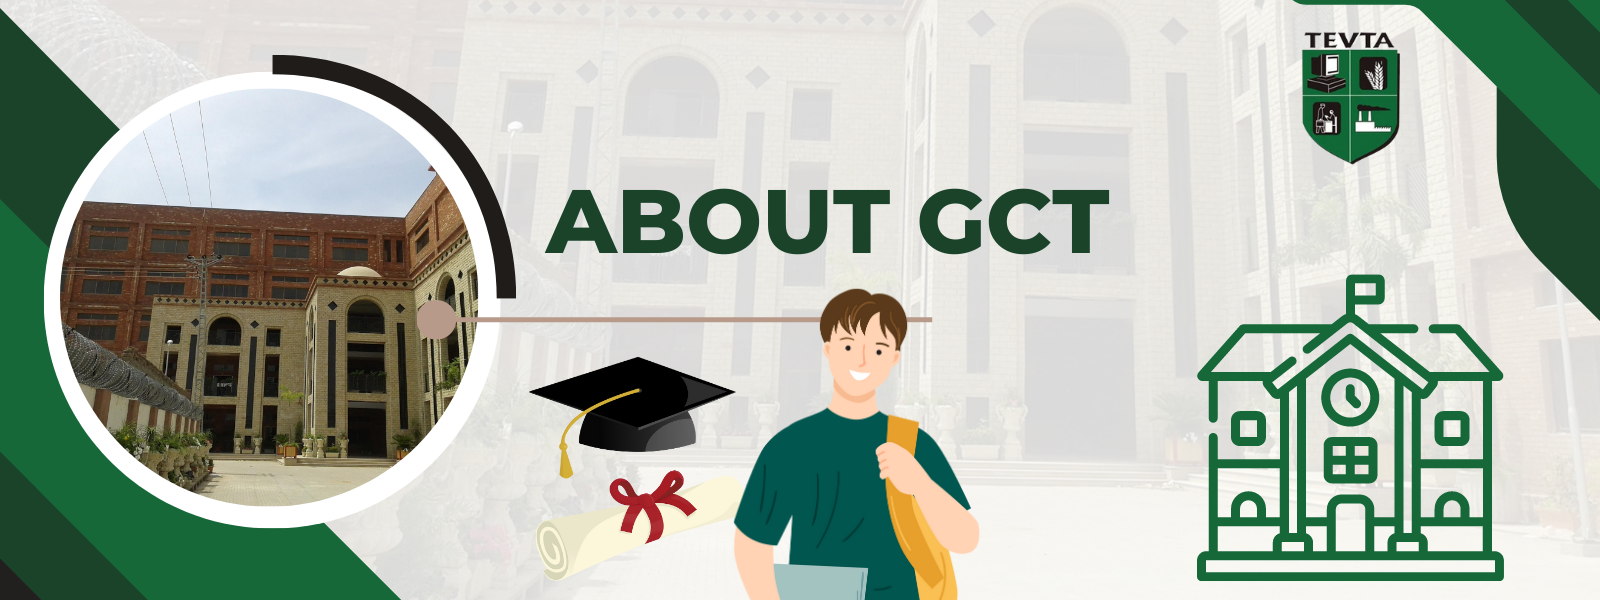 About GCT